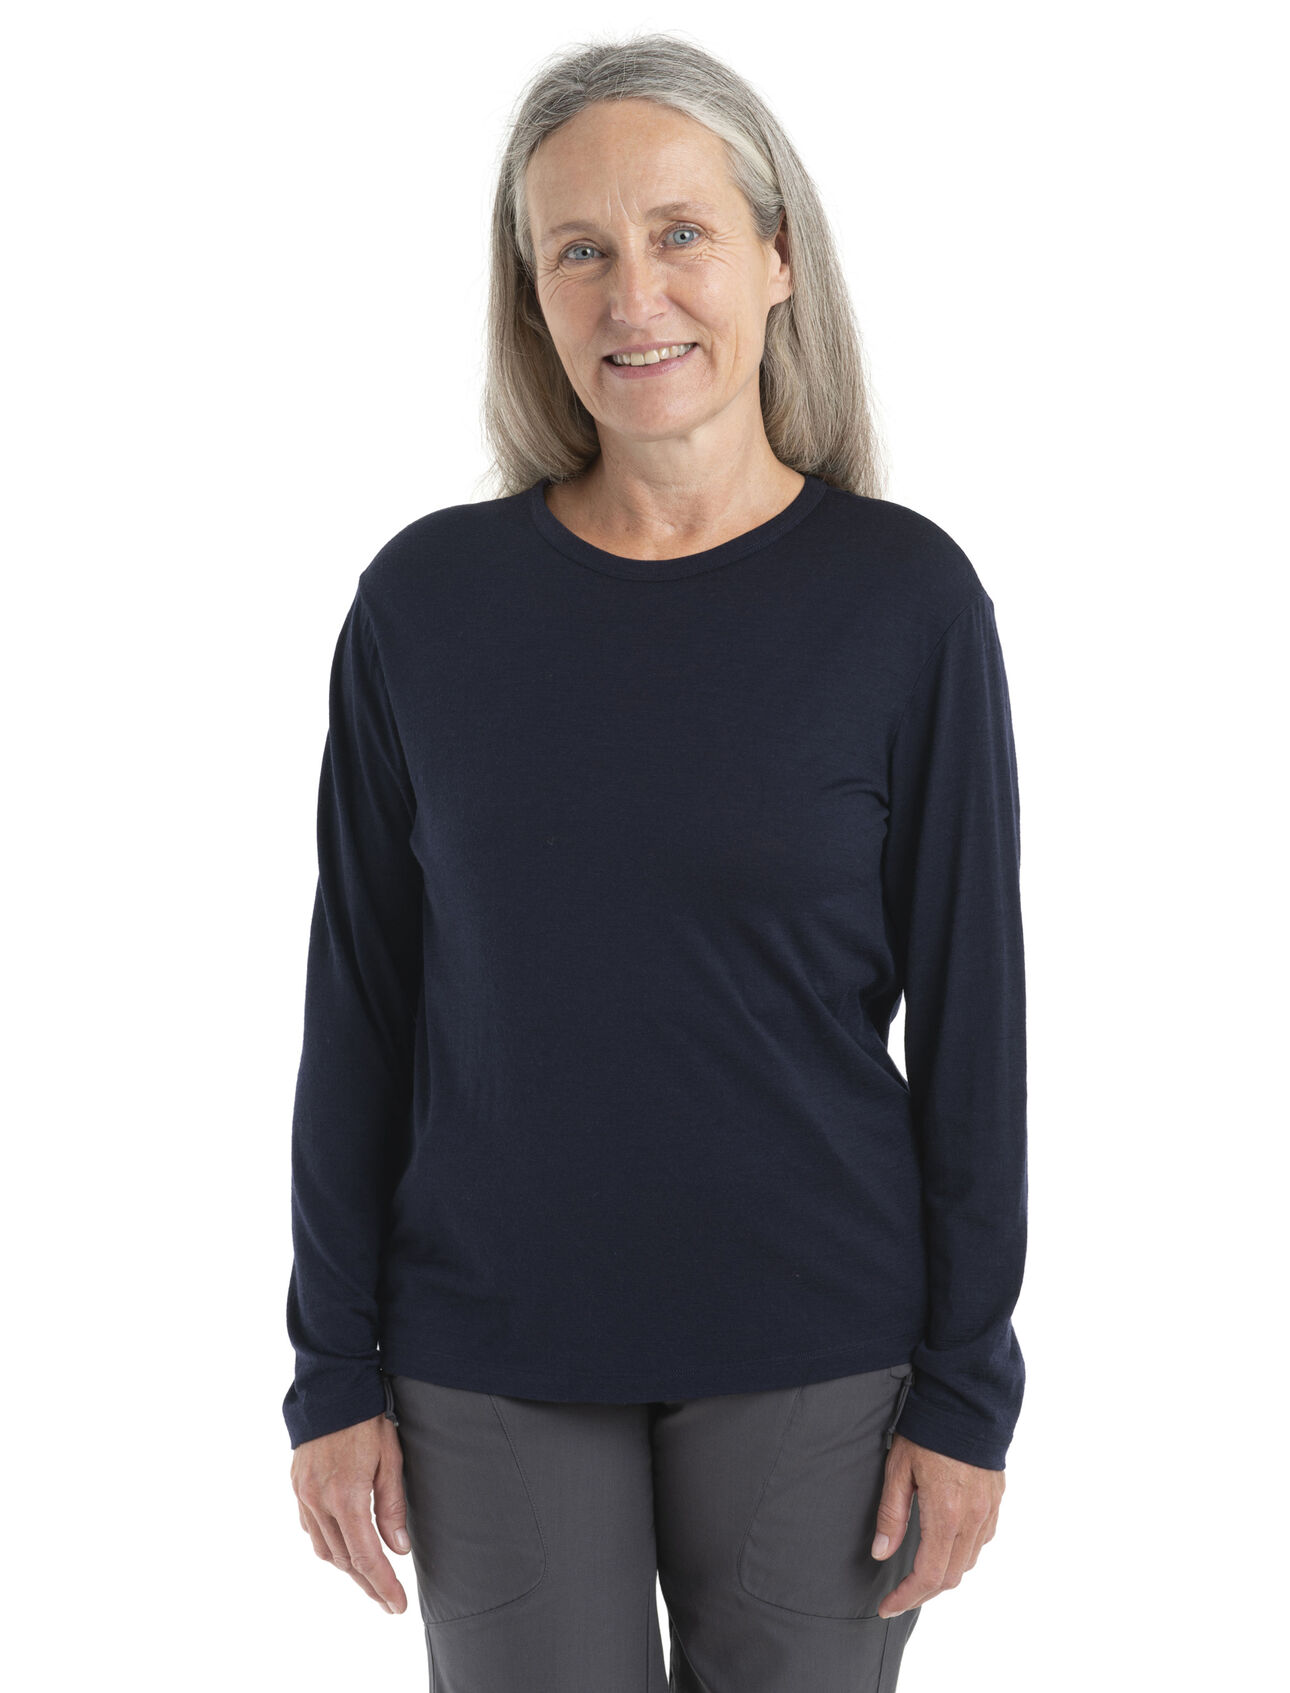 Womens Merino Granary Long Sleeve T-Shirt A classic tee with a relaxed fit and soft, breathable, 100% merino wool fabric, the Granary Long Sleeve Tee is all about everyday comfort and style.